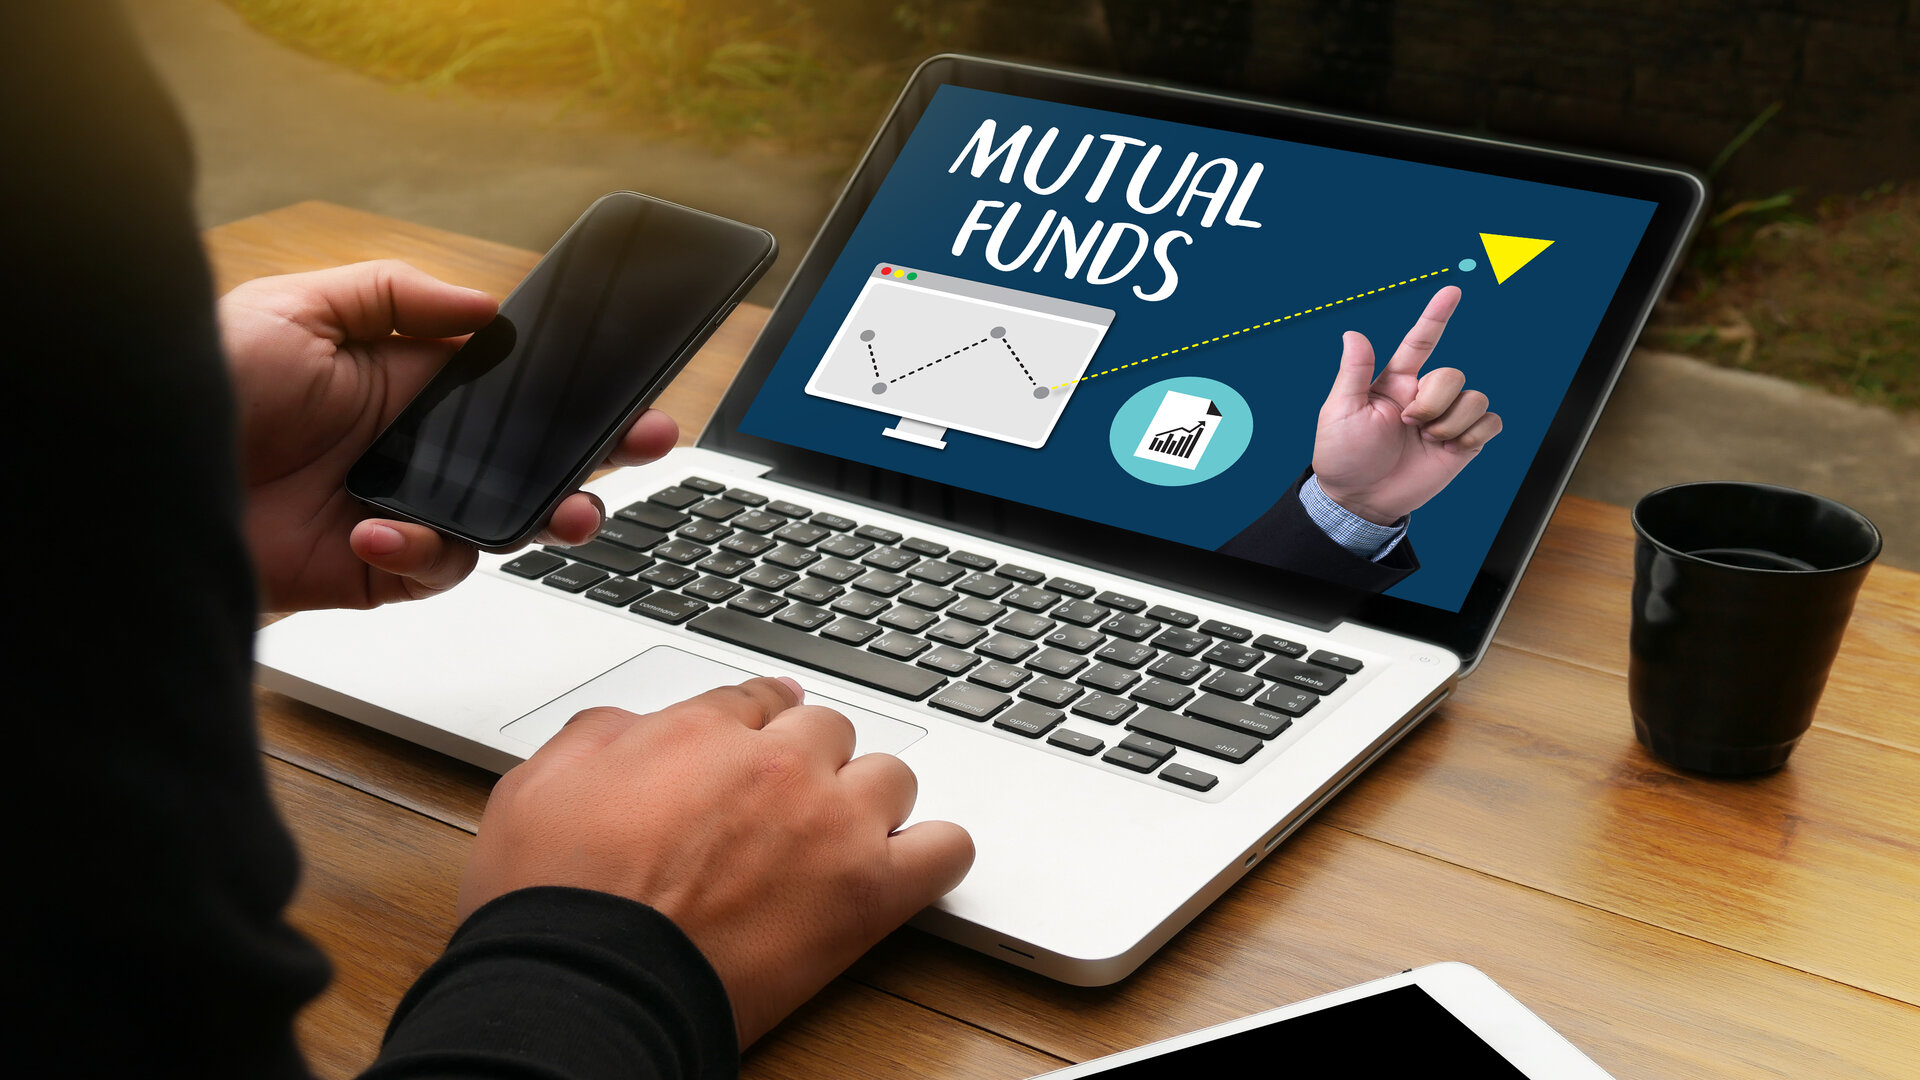 mutual funds - My journey and lessons learned after investing.